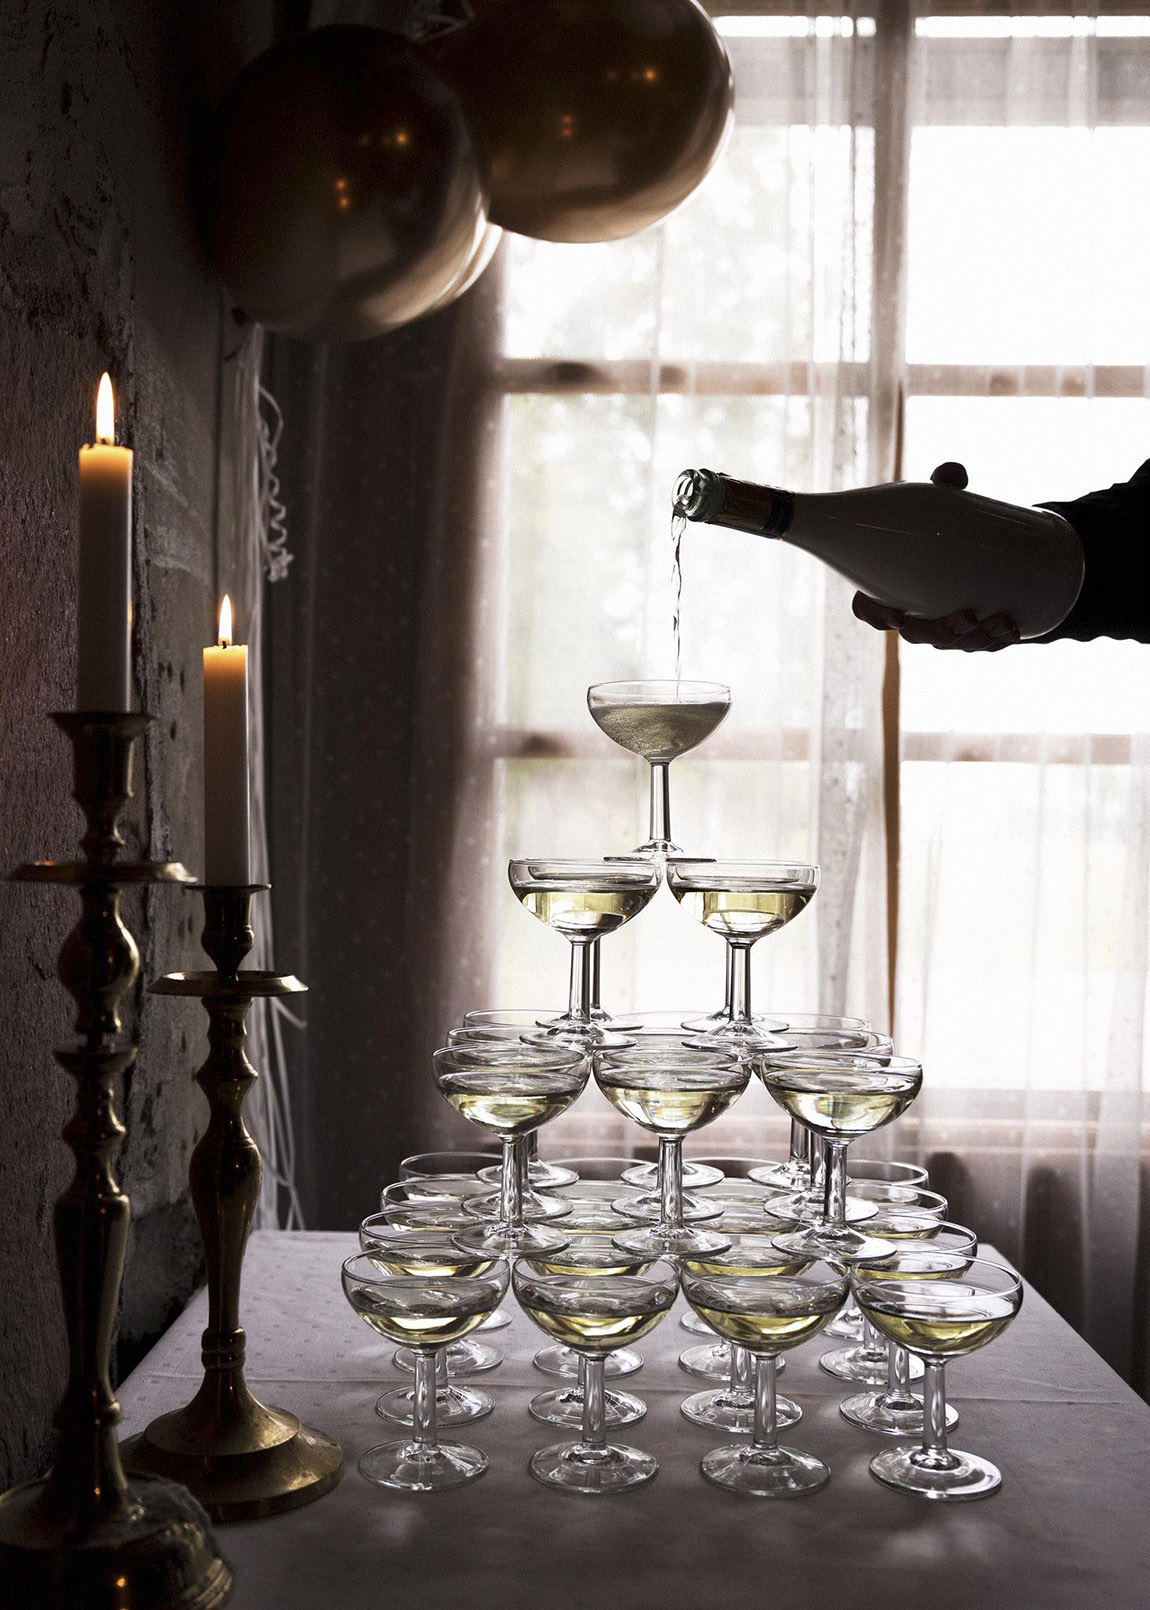 Ulfsby Gård: A castle wedding in the countryside of Åland